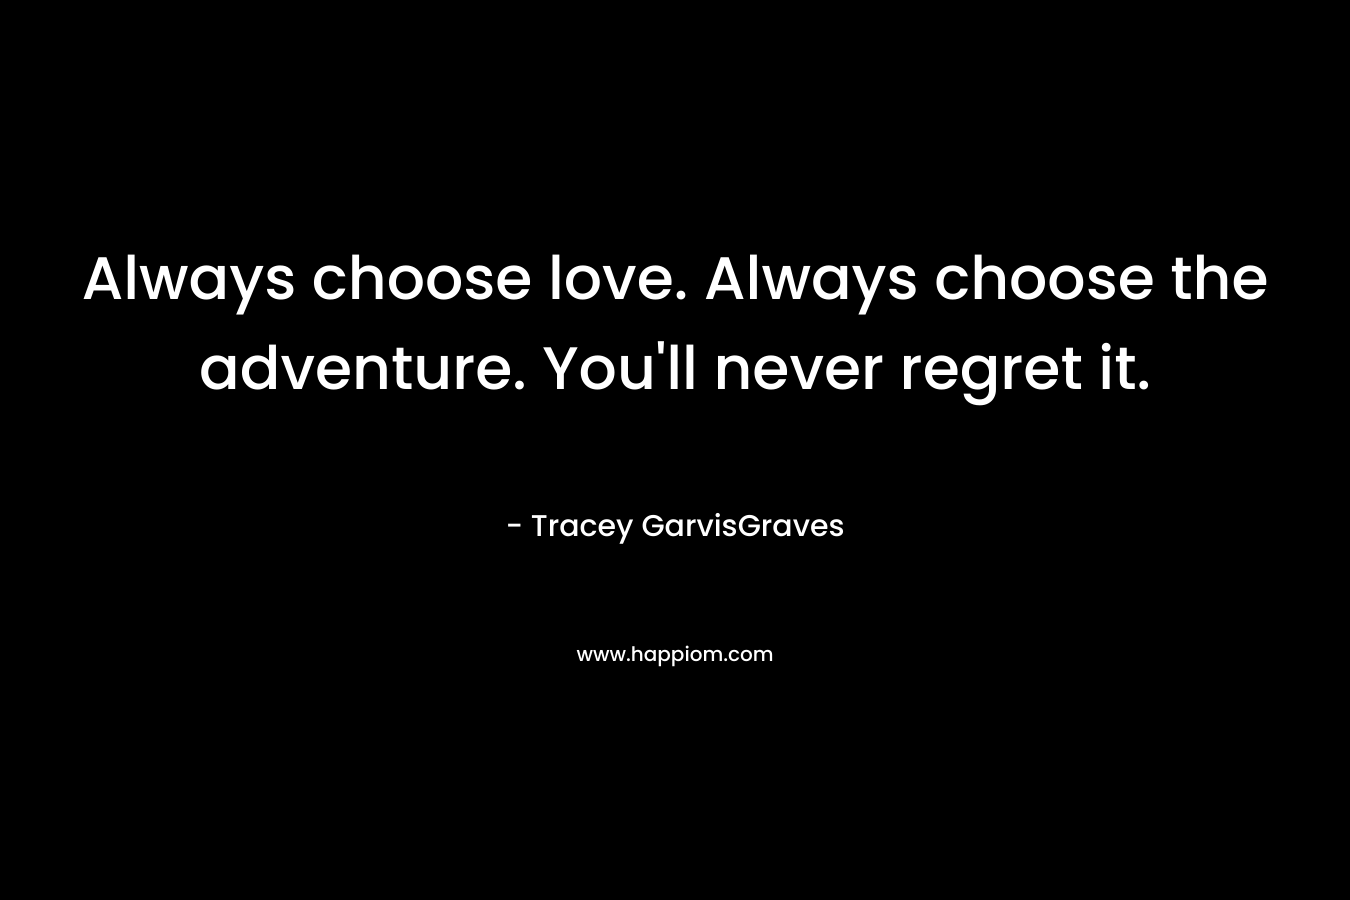 Always choose love. Always choose the adventure. You’ll never regret it. – Tracey GarvisGraves